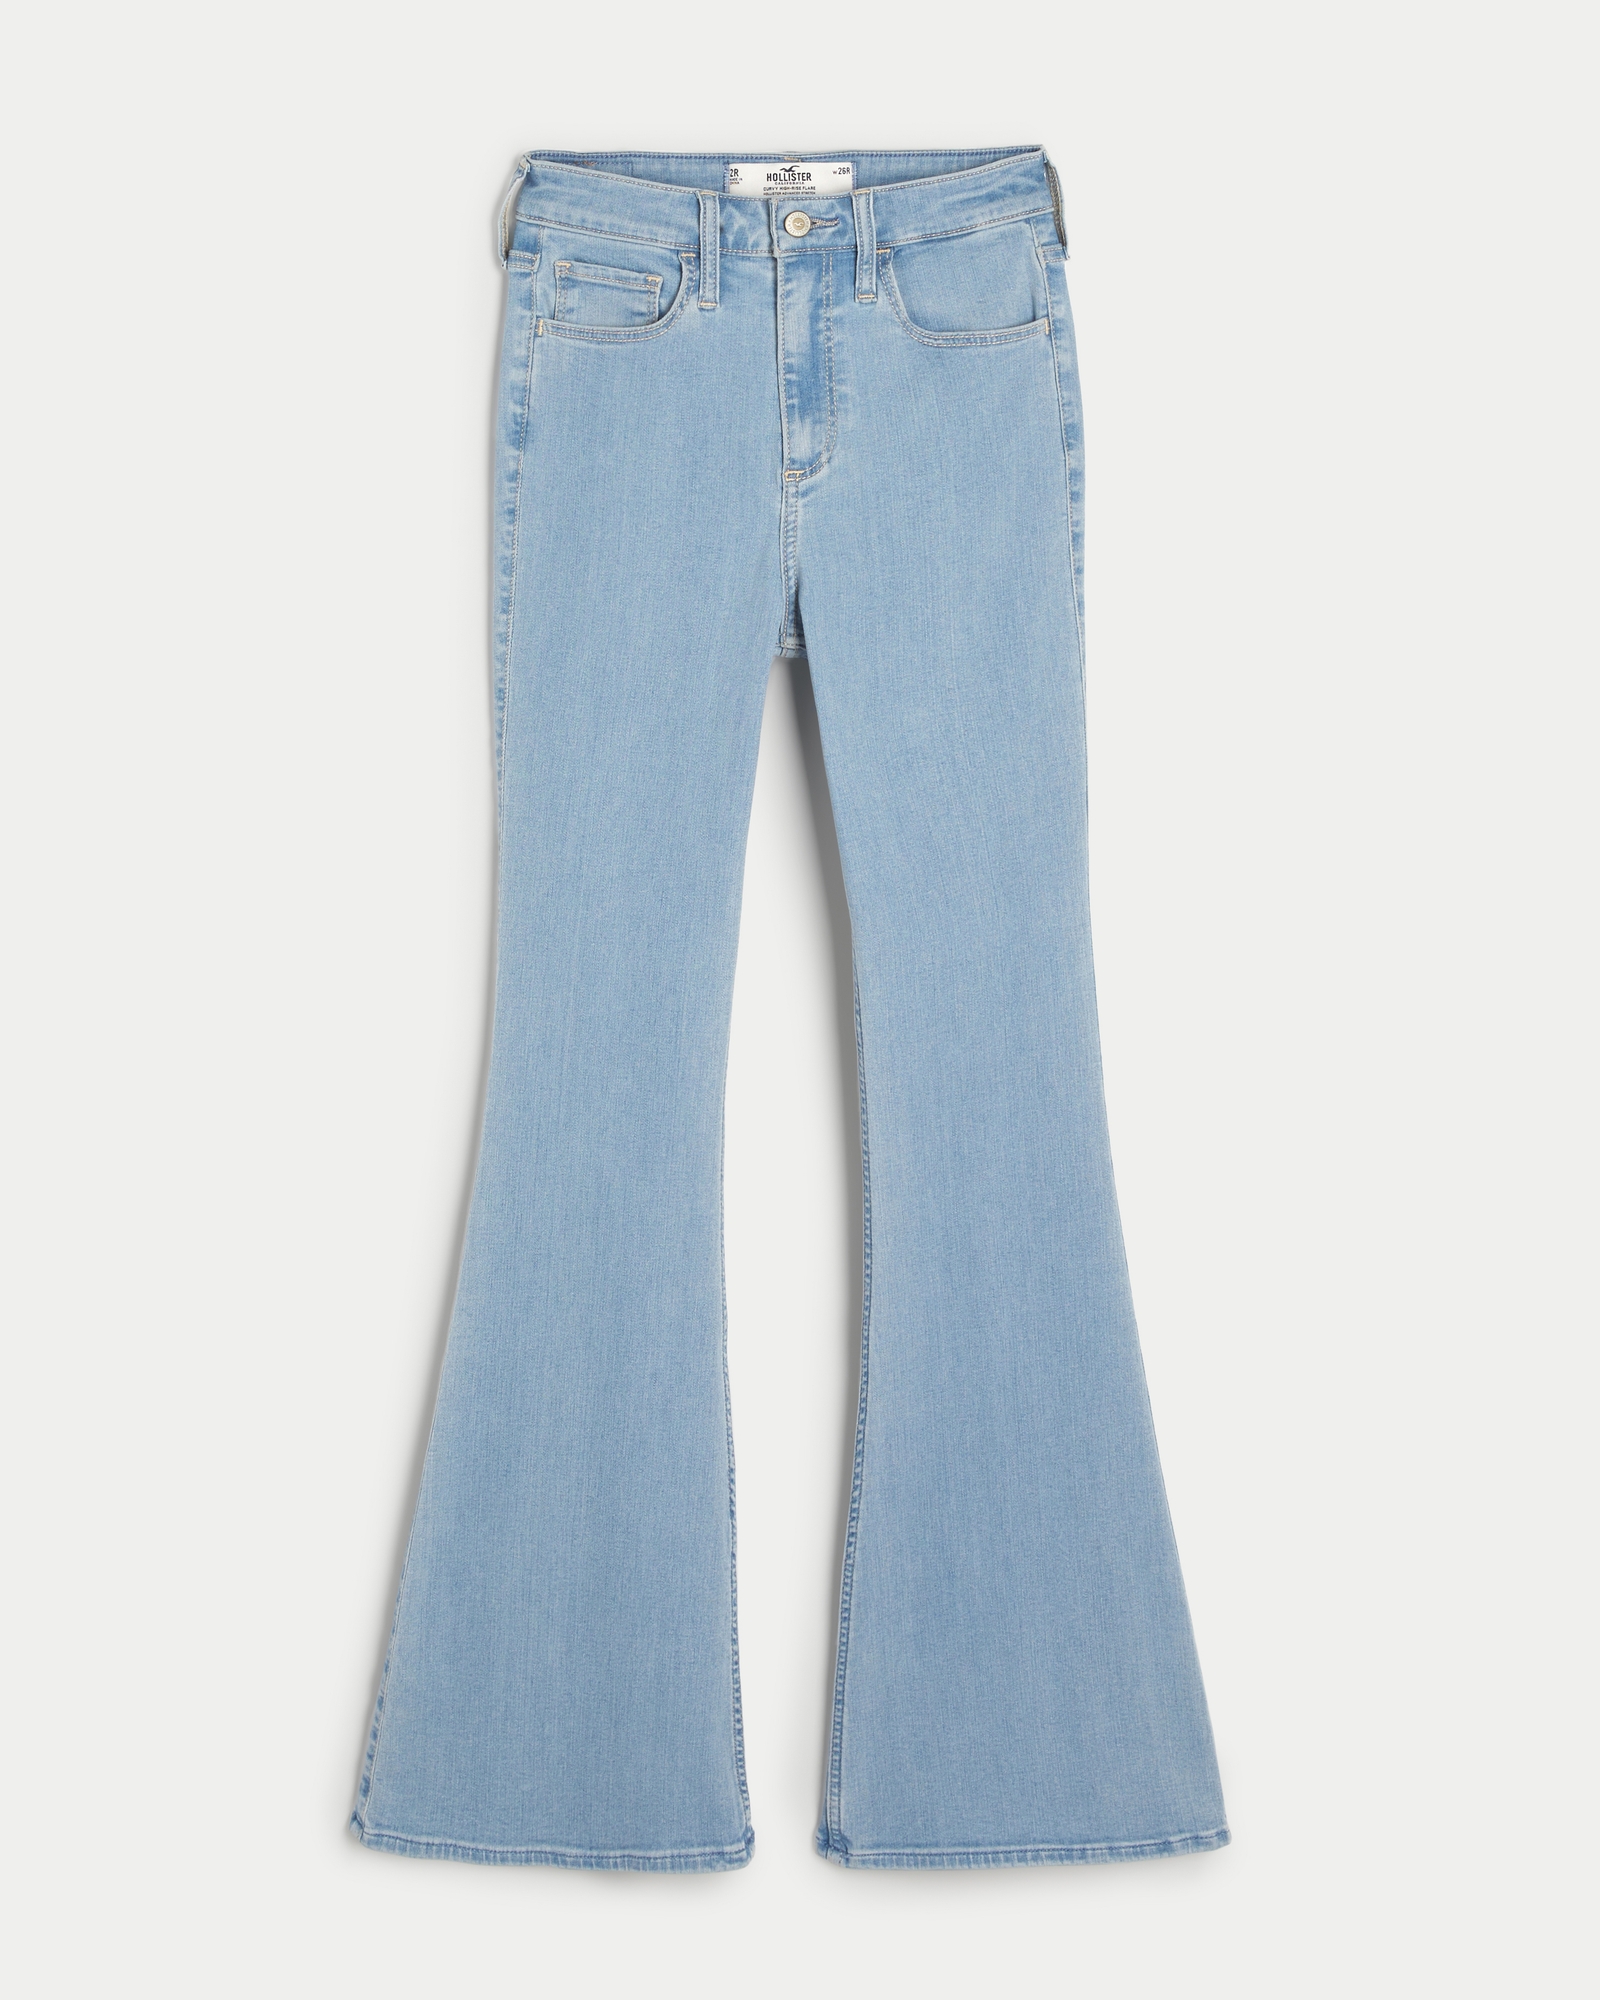 Hollister Flare Jeans Size 0 - $18 (66% Off Retail) - From Amanda